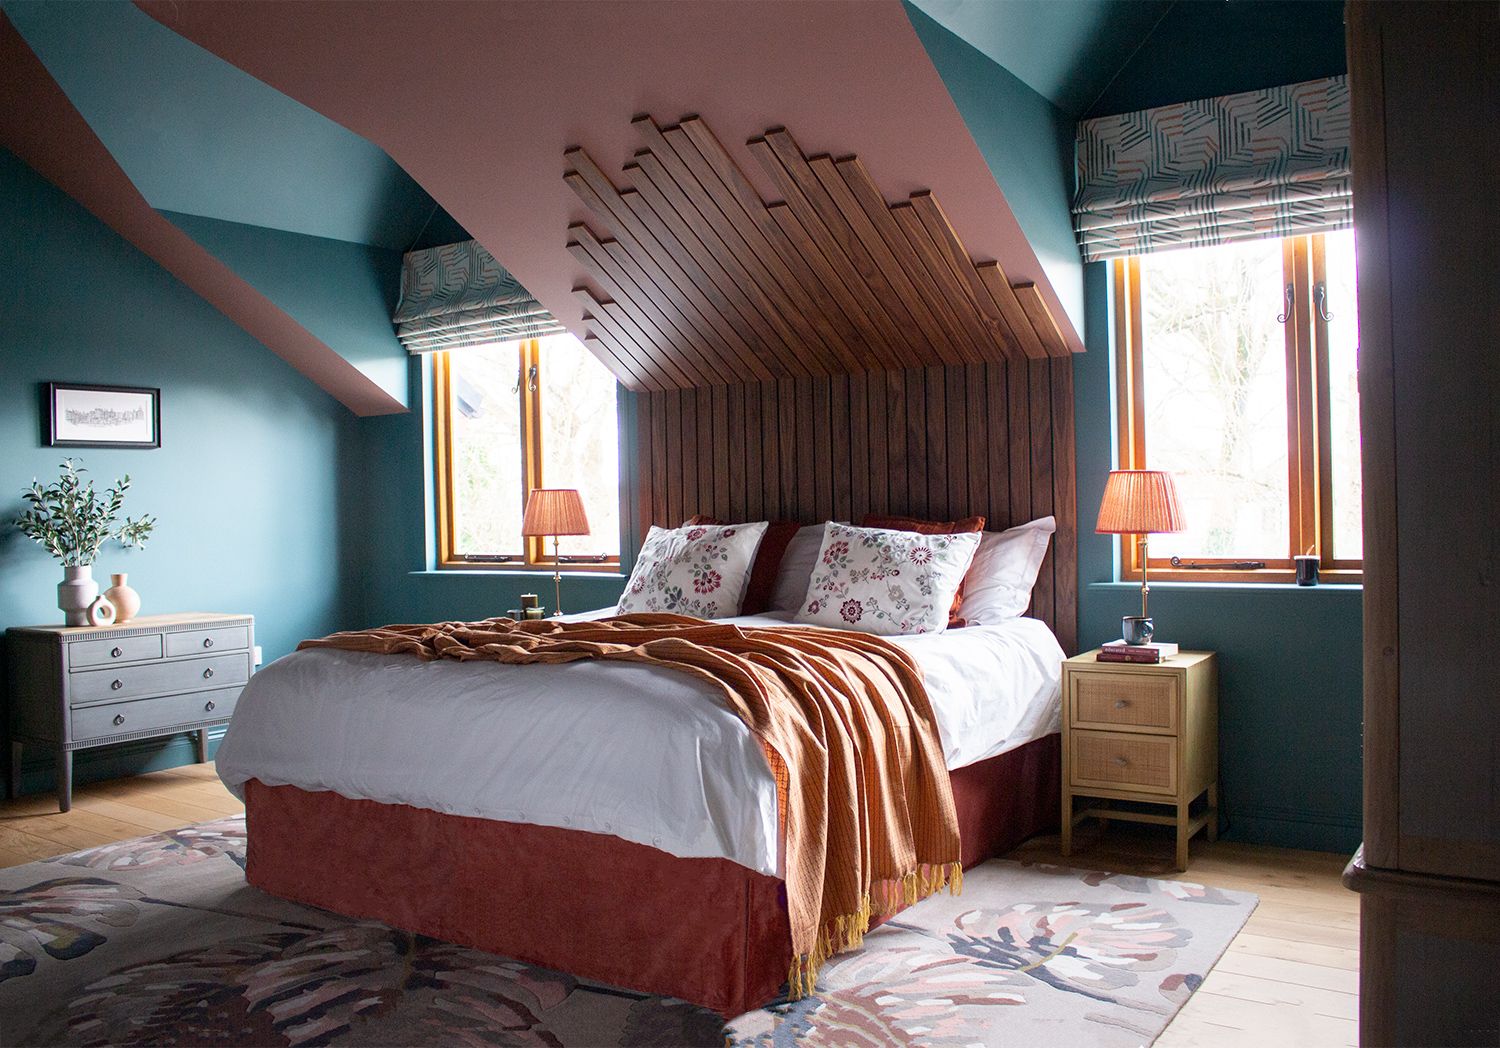 A photo of the main bedroom showing the velvet edged bed and the bespoke walnut headboard.